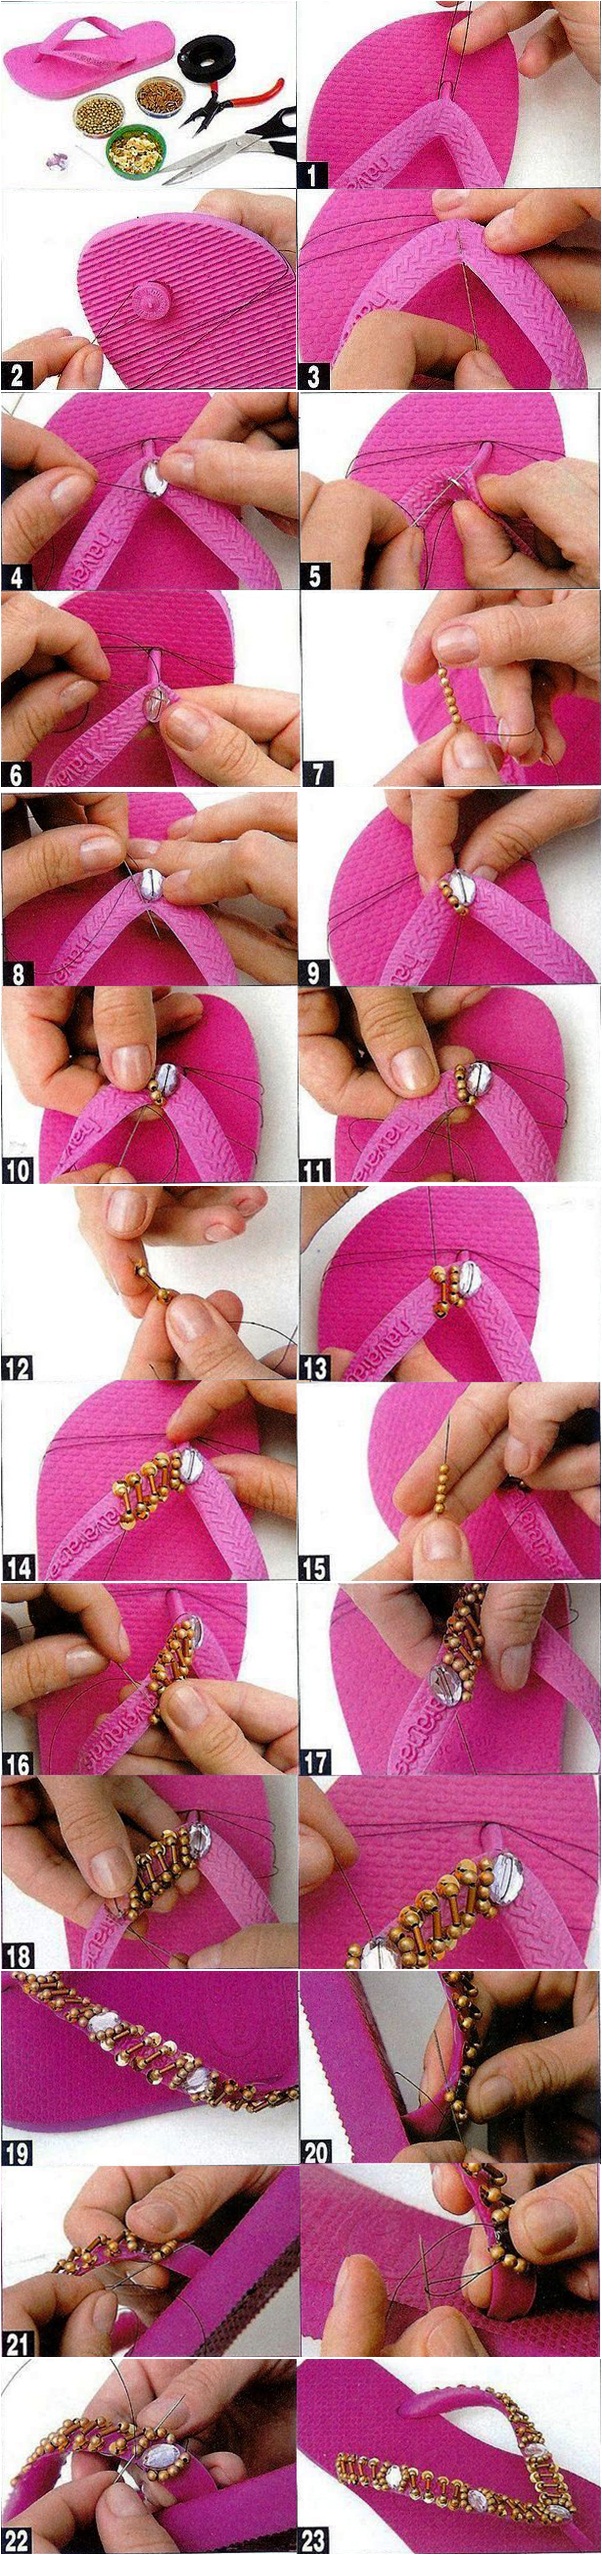 diy fashion summer projects pink flip flops gold tutorial beads